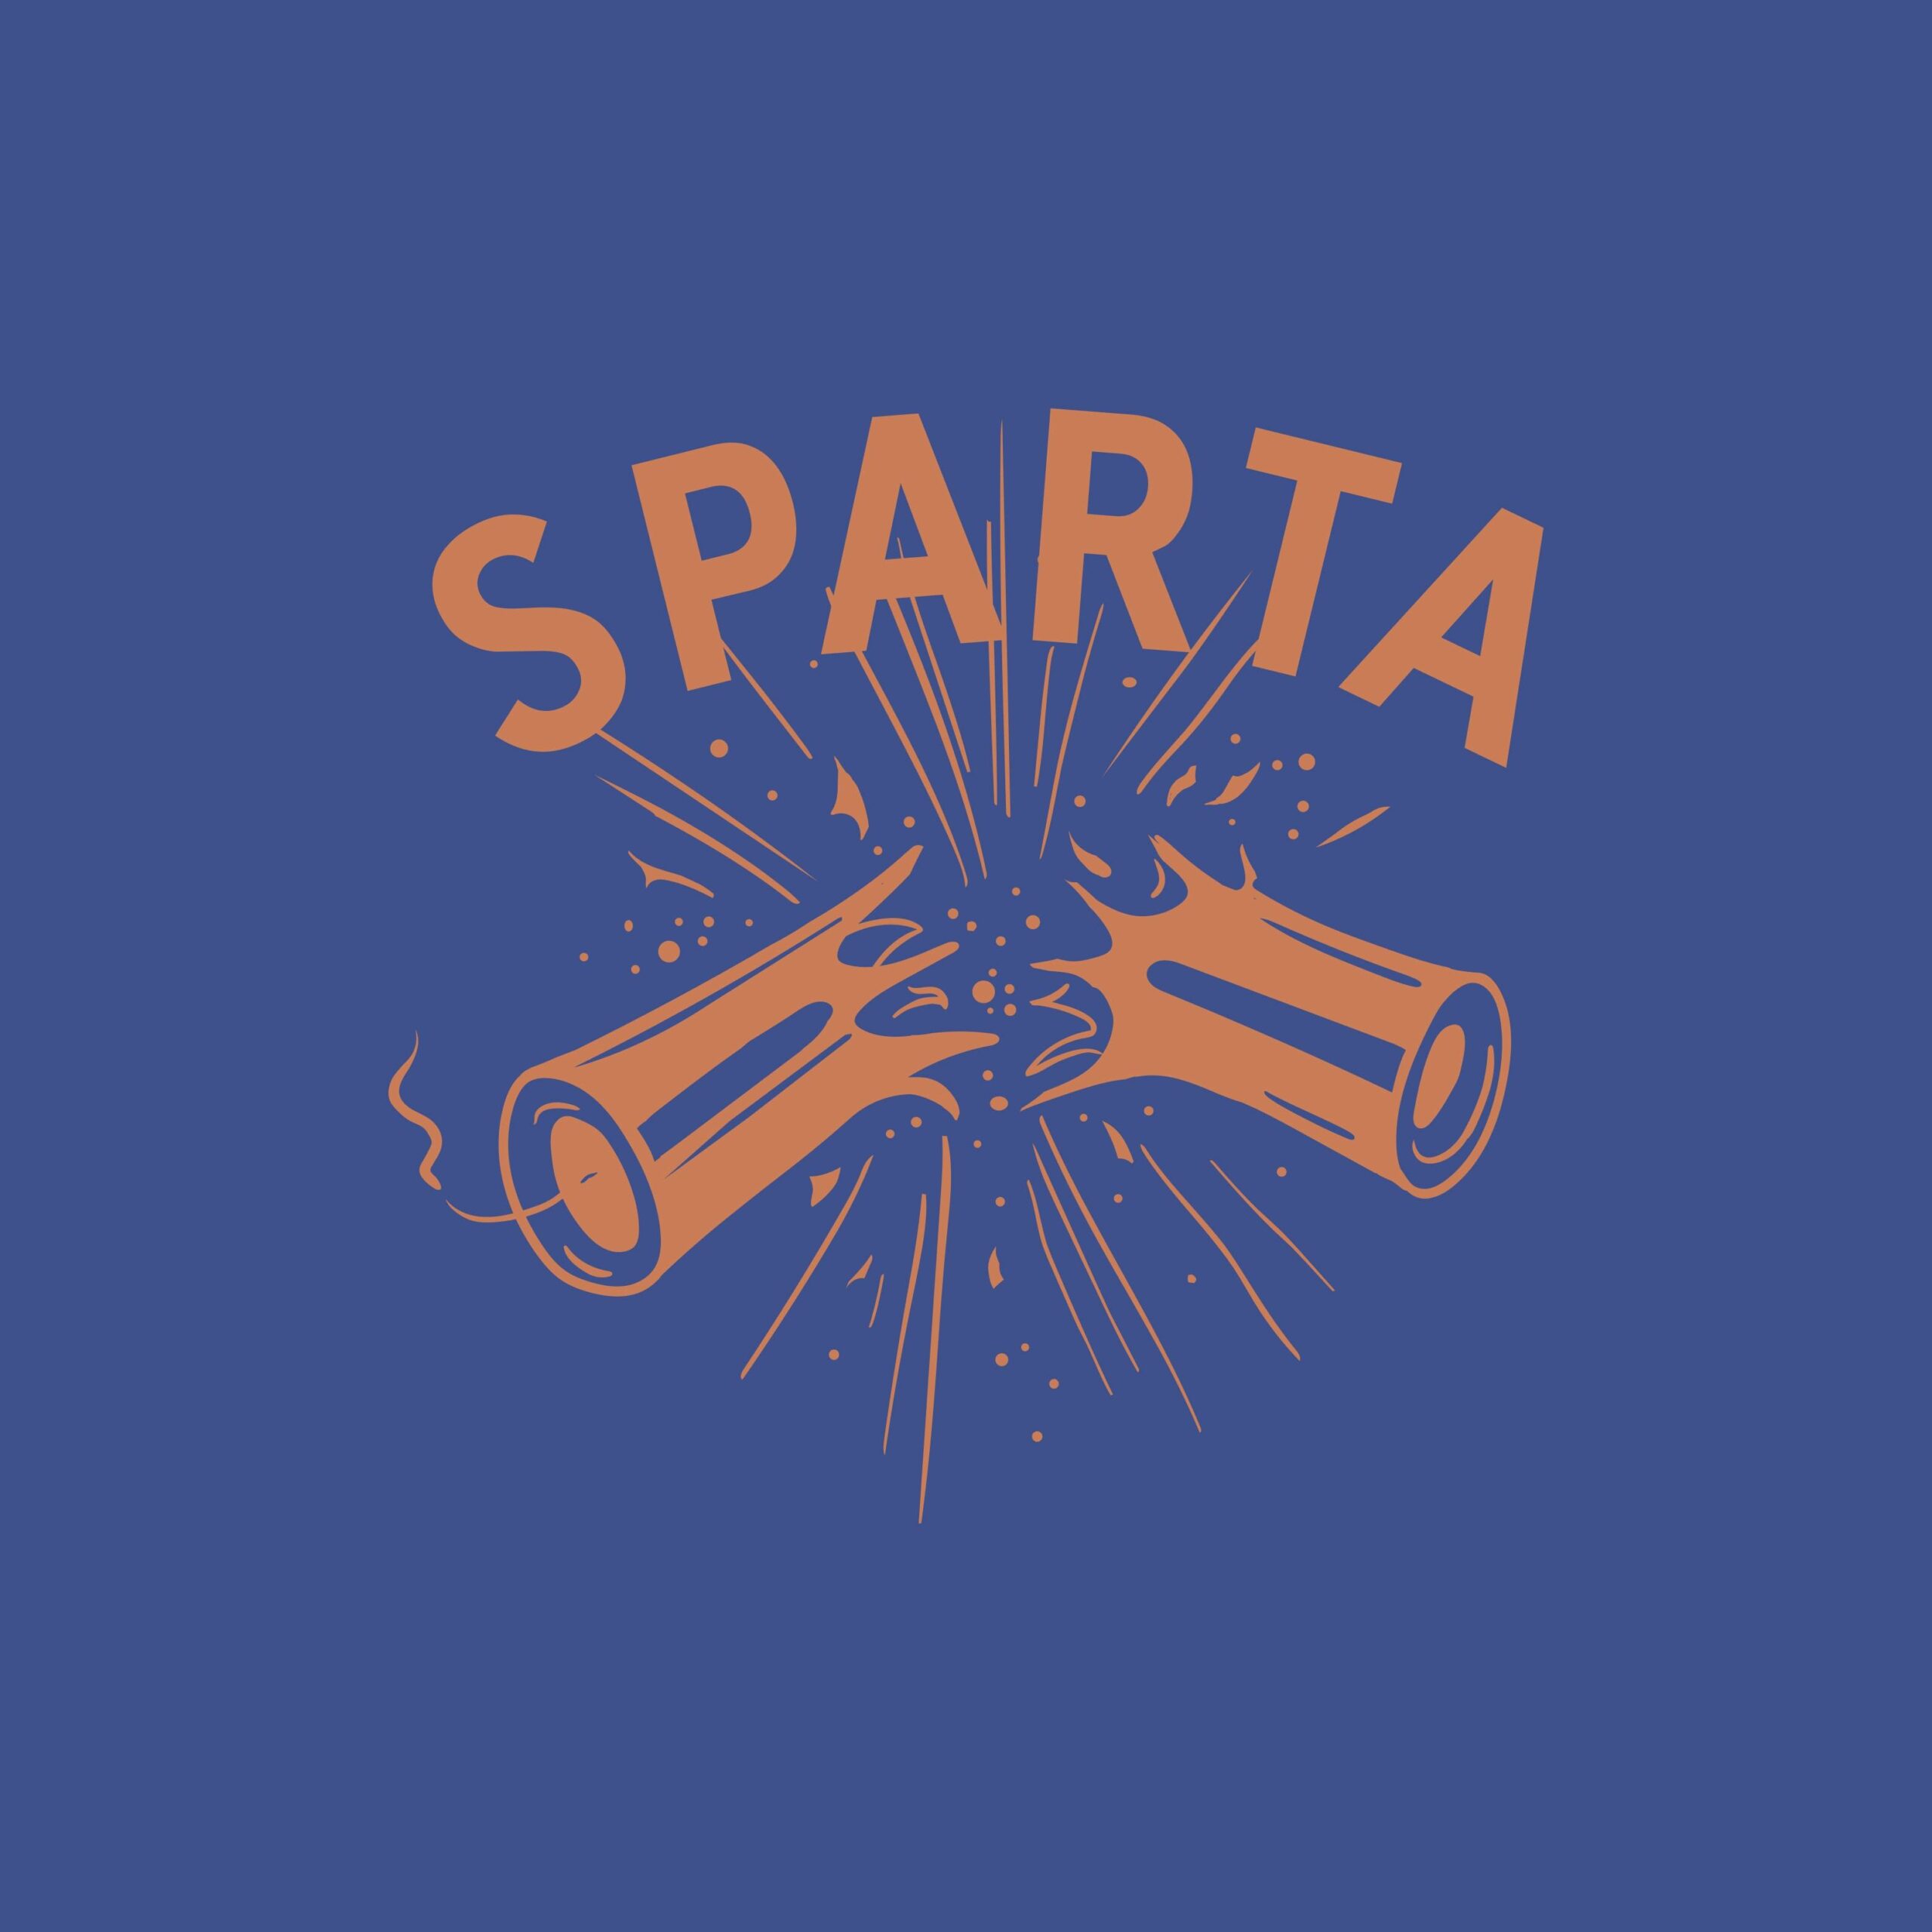 Sparta, You Don't Say?